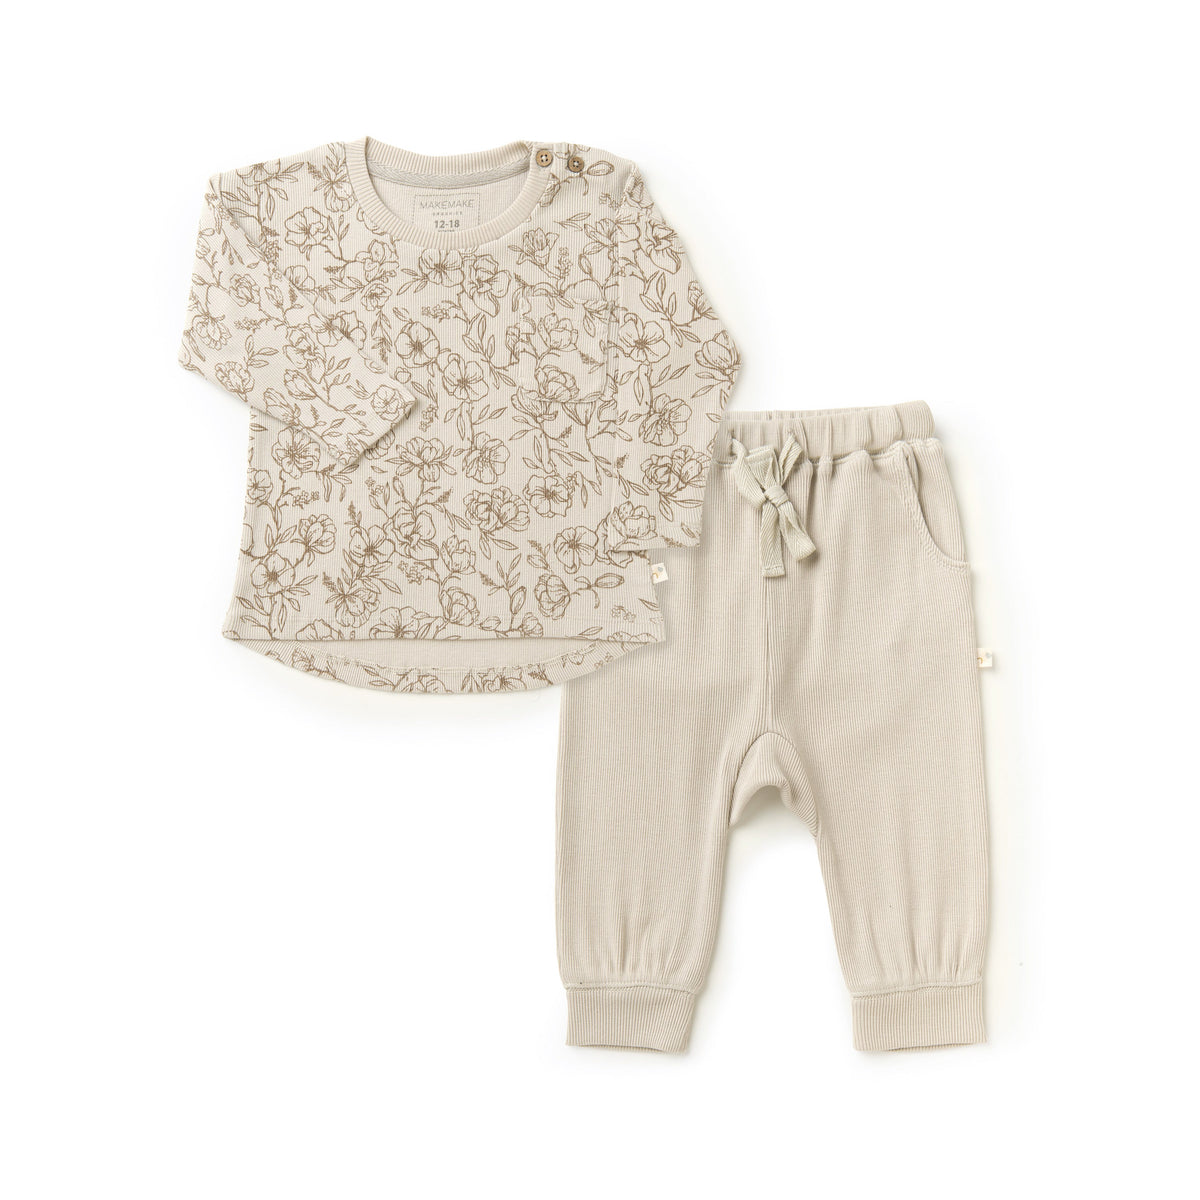 Organic Cotton Clothing Collection for Baby & Toddler – Makemake Organics